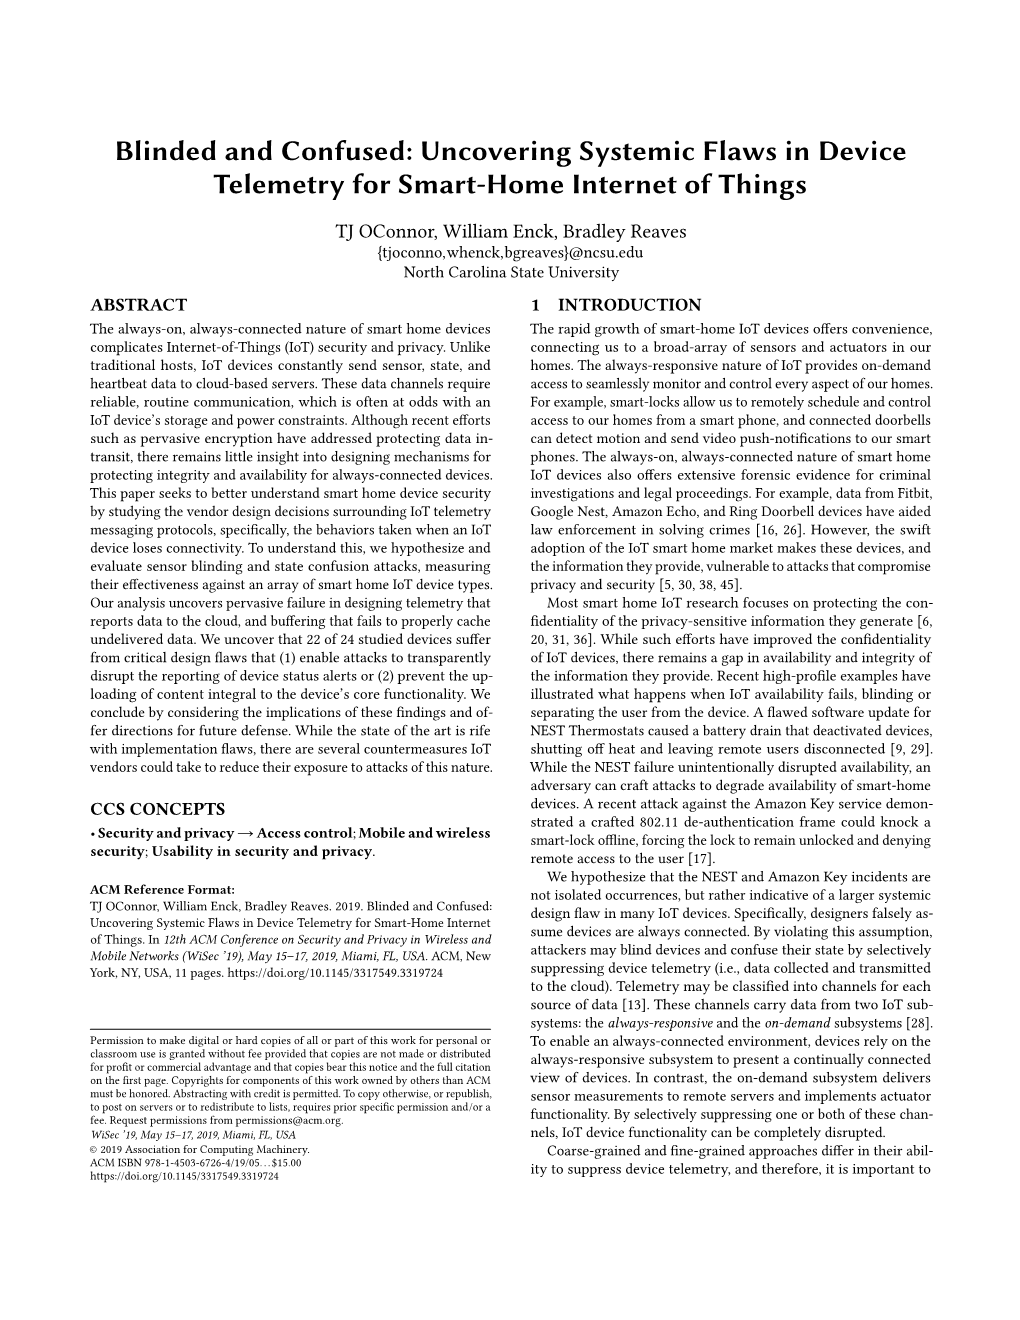 Blinded and Confused: Uncovering Systemic Flaws in Device Telemetry for Smart-Home Internet of Things